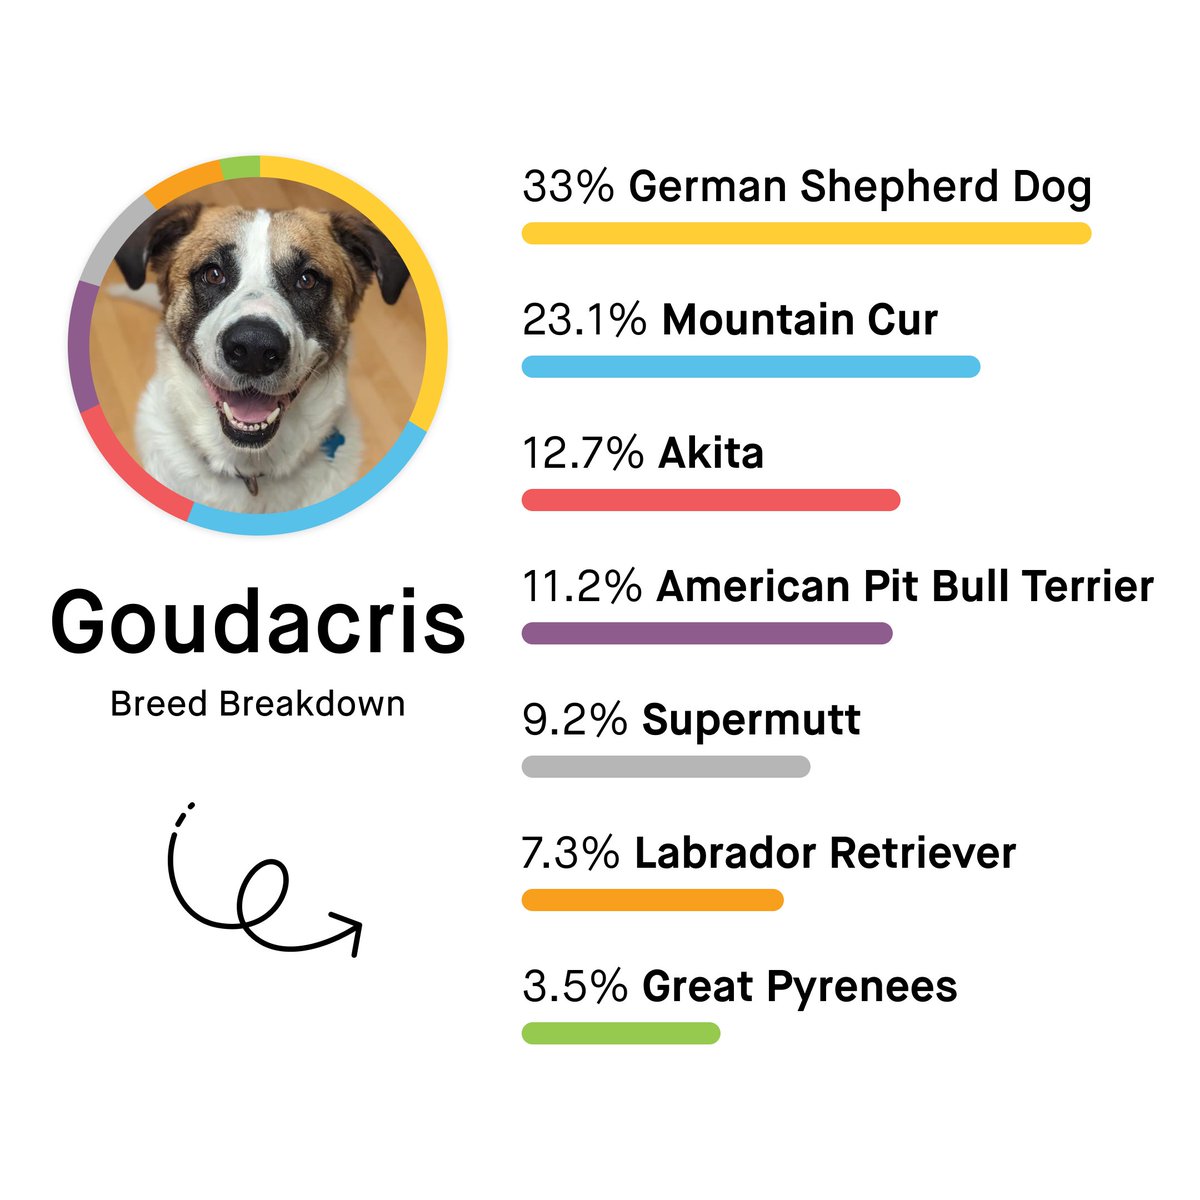 Did you see Oakland upset Kentucky? 🏀 Their victory over the No. 3 seed has us thinking about one of OUR favorite underdogs — Goudacris! Learn more about how Goudacris survived a months-long battle with heartworm and found his forever family. bit.ly/496FCnA